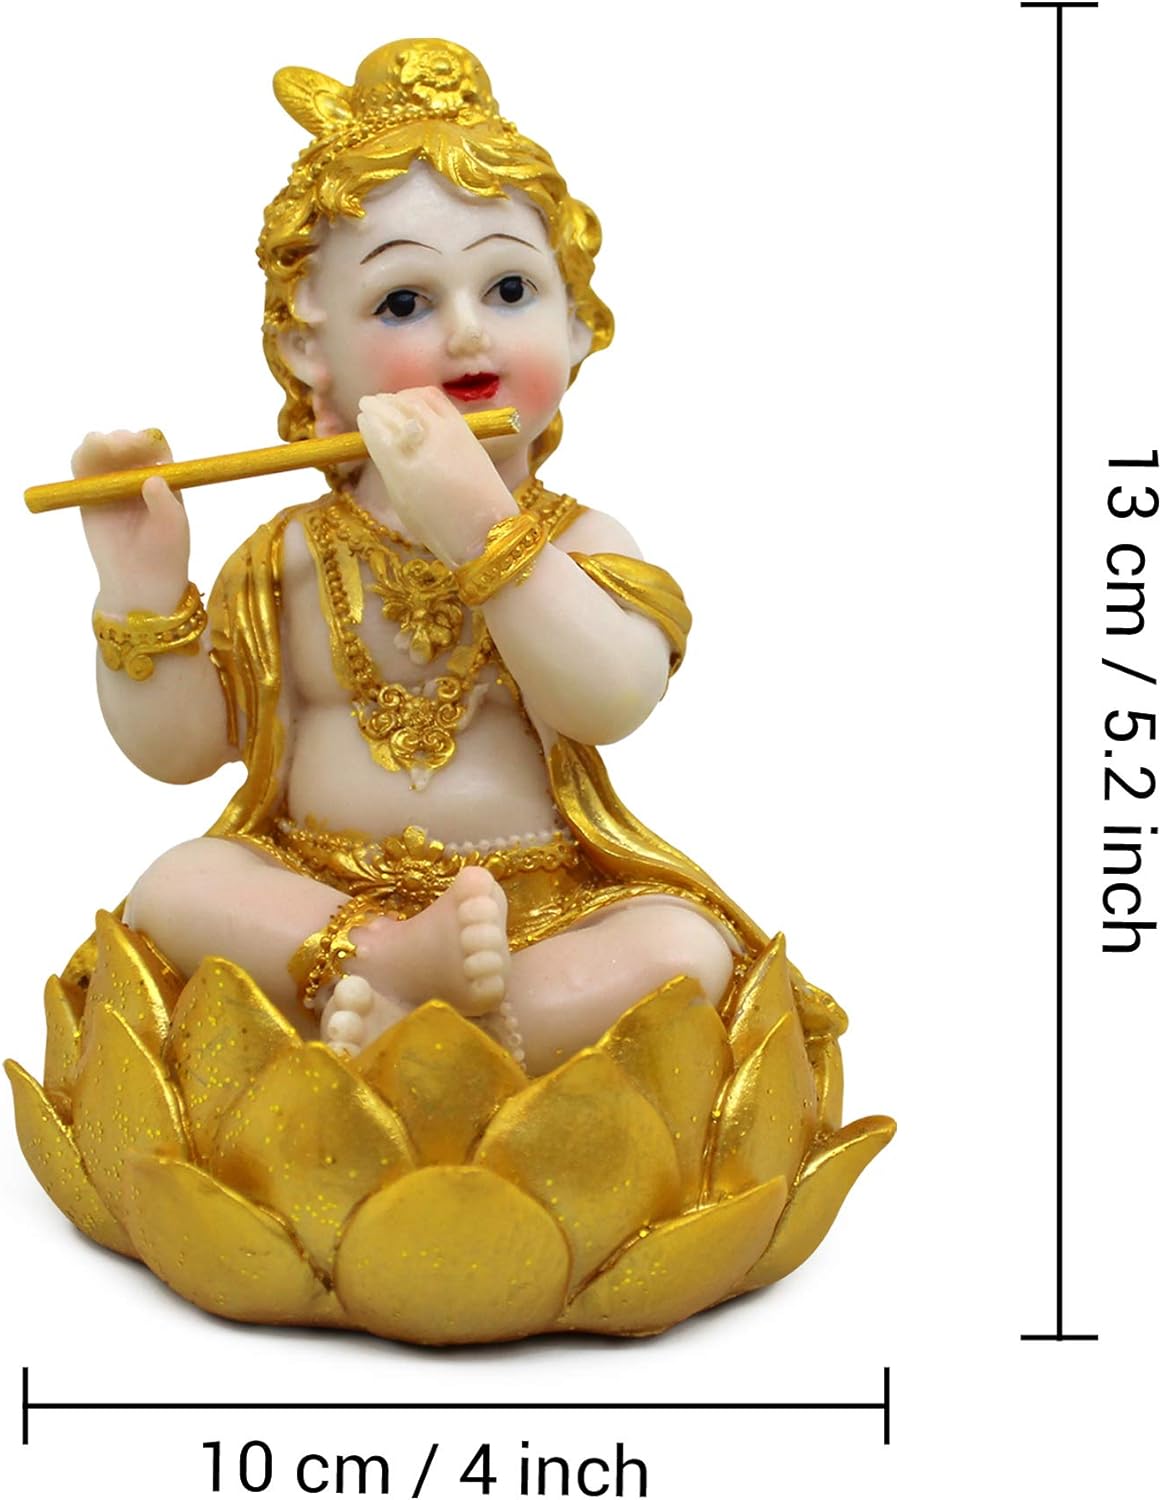 TIED RIBBONS Krishna Statue Hindu God Resin Statue | 5.2 X 4 Inch | Krishna Idol Figurine Decorative Showpiece for Table, House Warming Gifting, Diwali Decorations for Home and Diwali Gifts